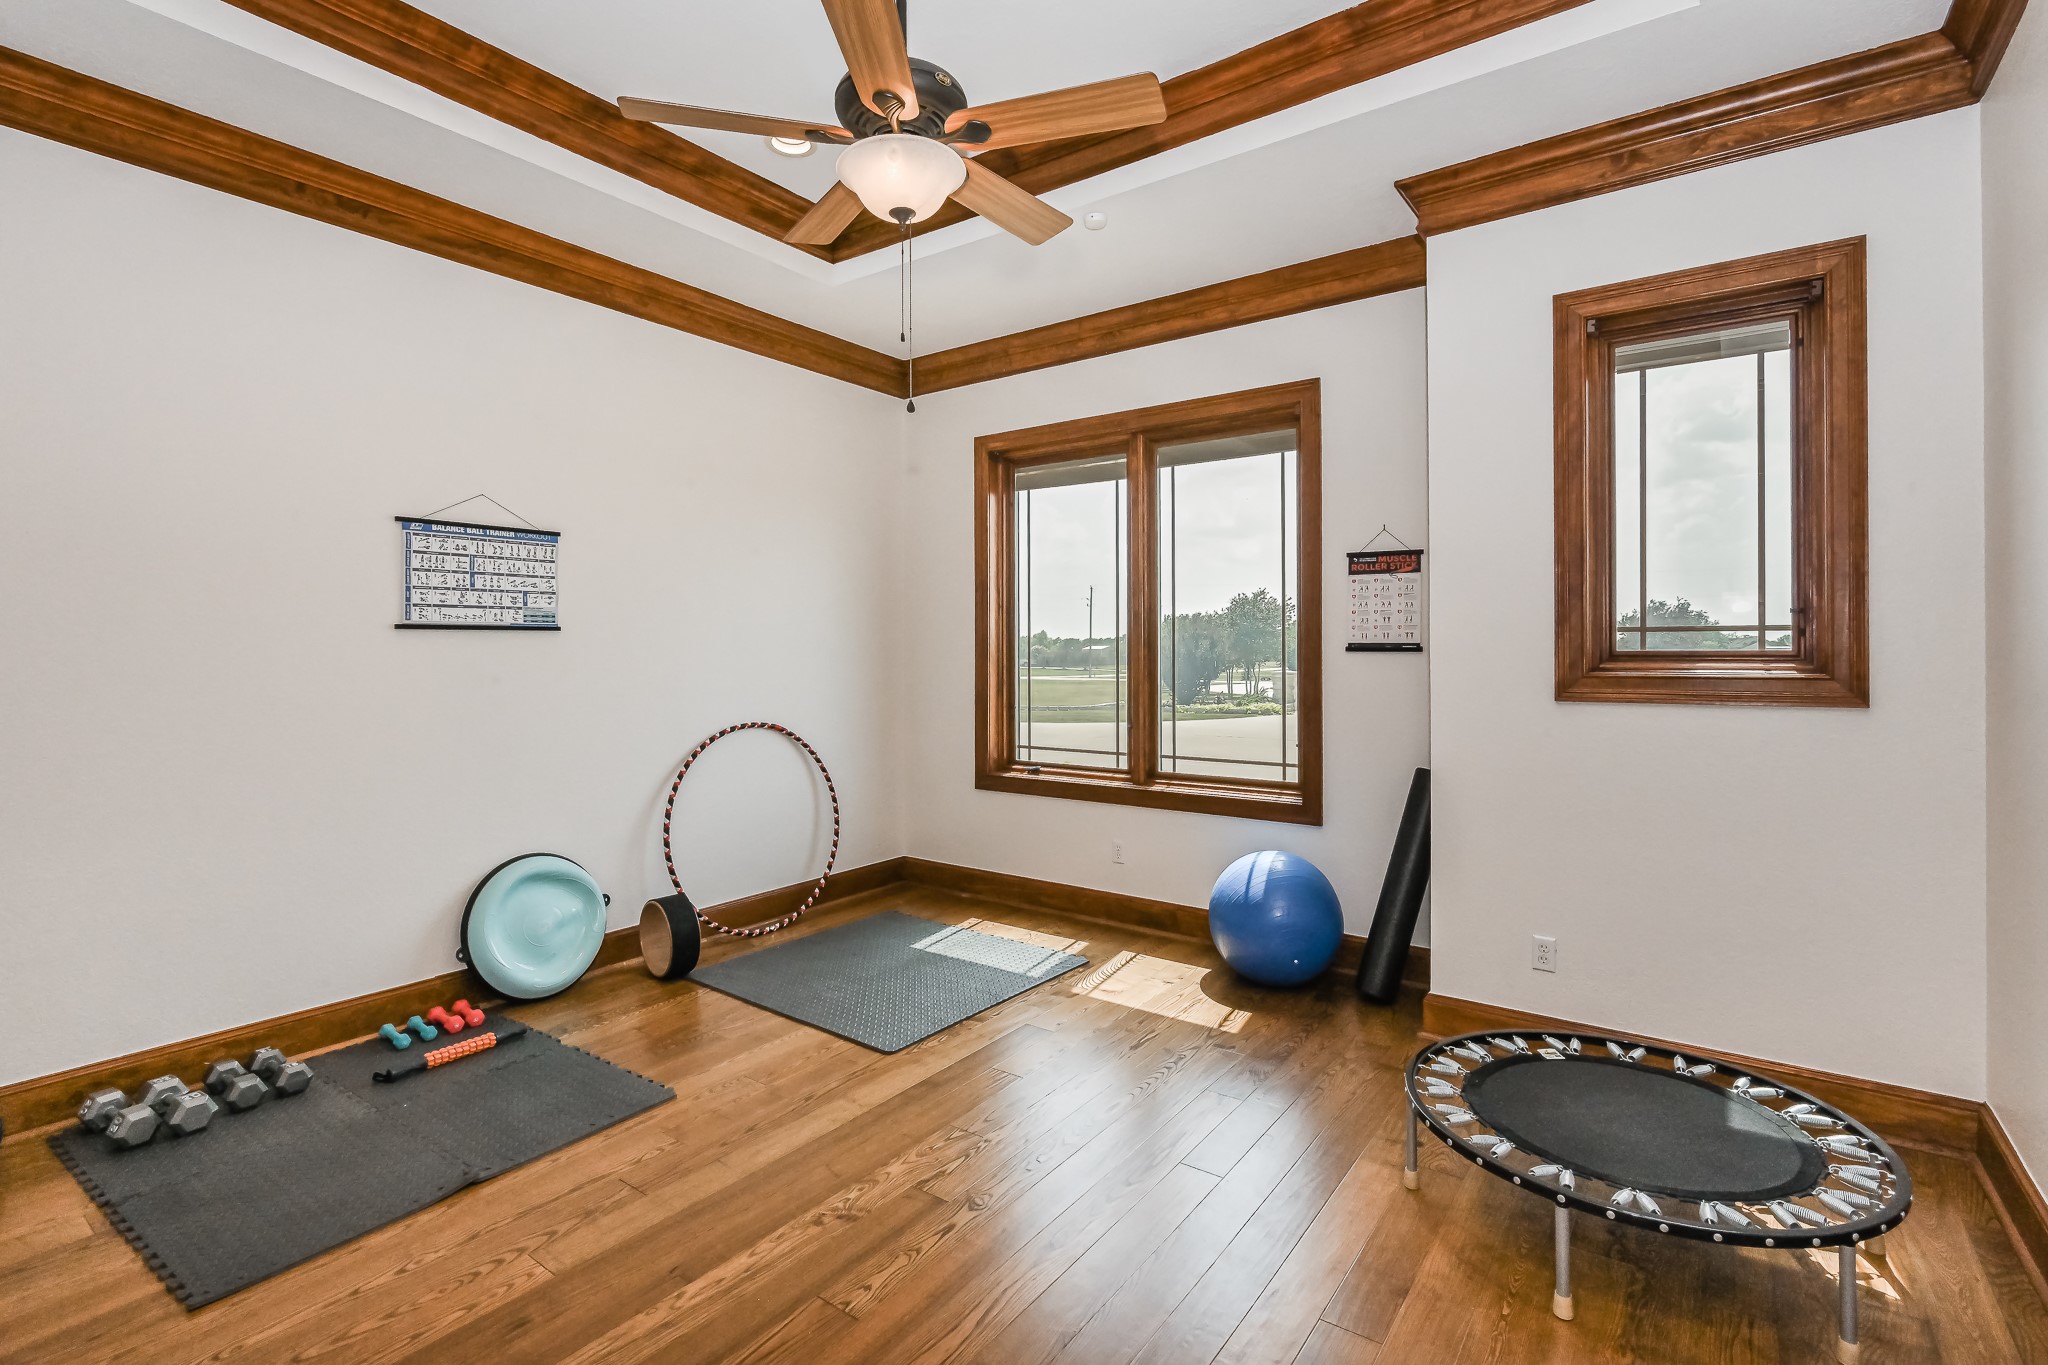 Second Flex room currently being used as a home gym and previously used as an office.